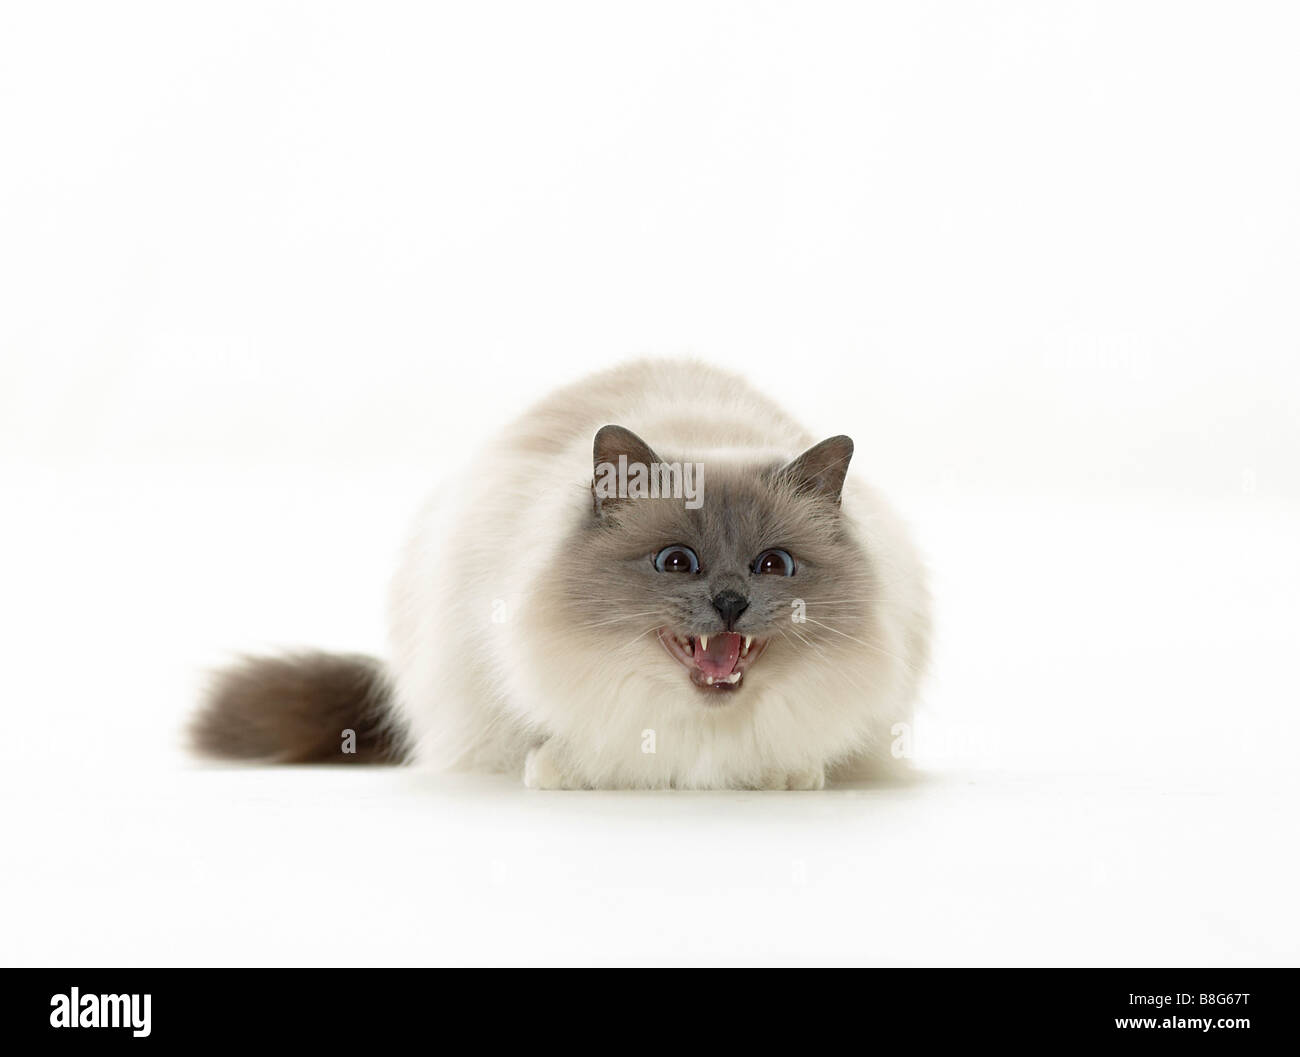 Sacred cat of Burma - hissing - cut out Stock Photo